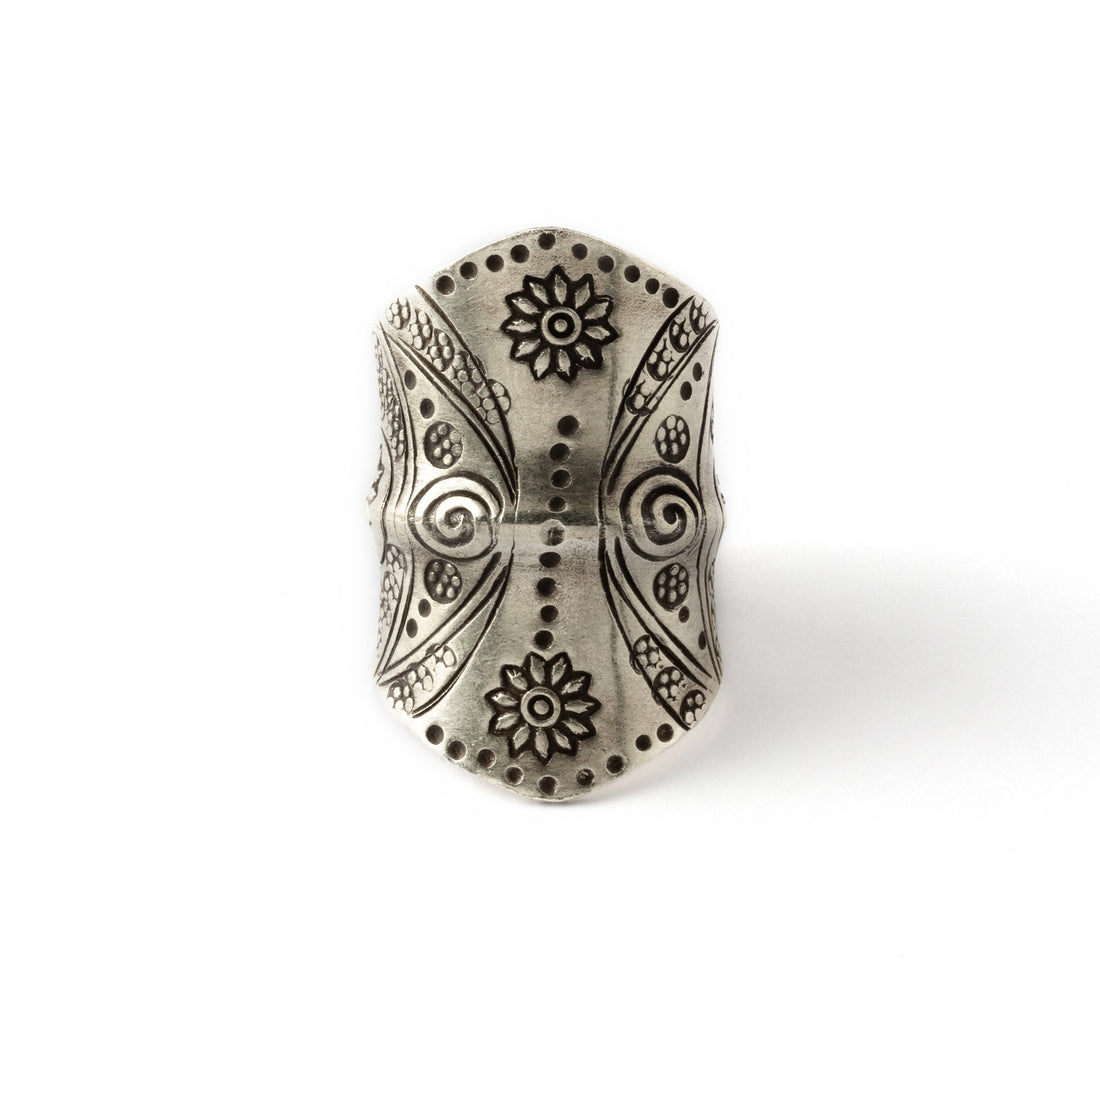 95% tribal silver long finger ring with etched tribal motifs front view